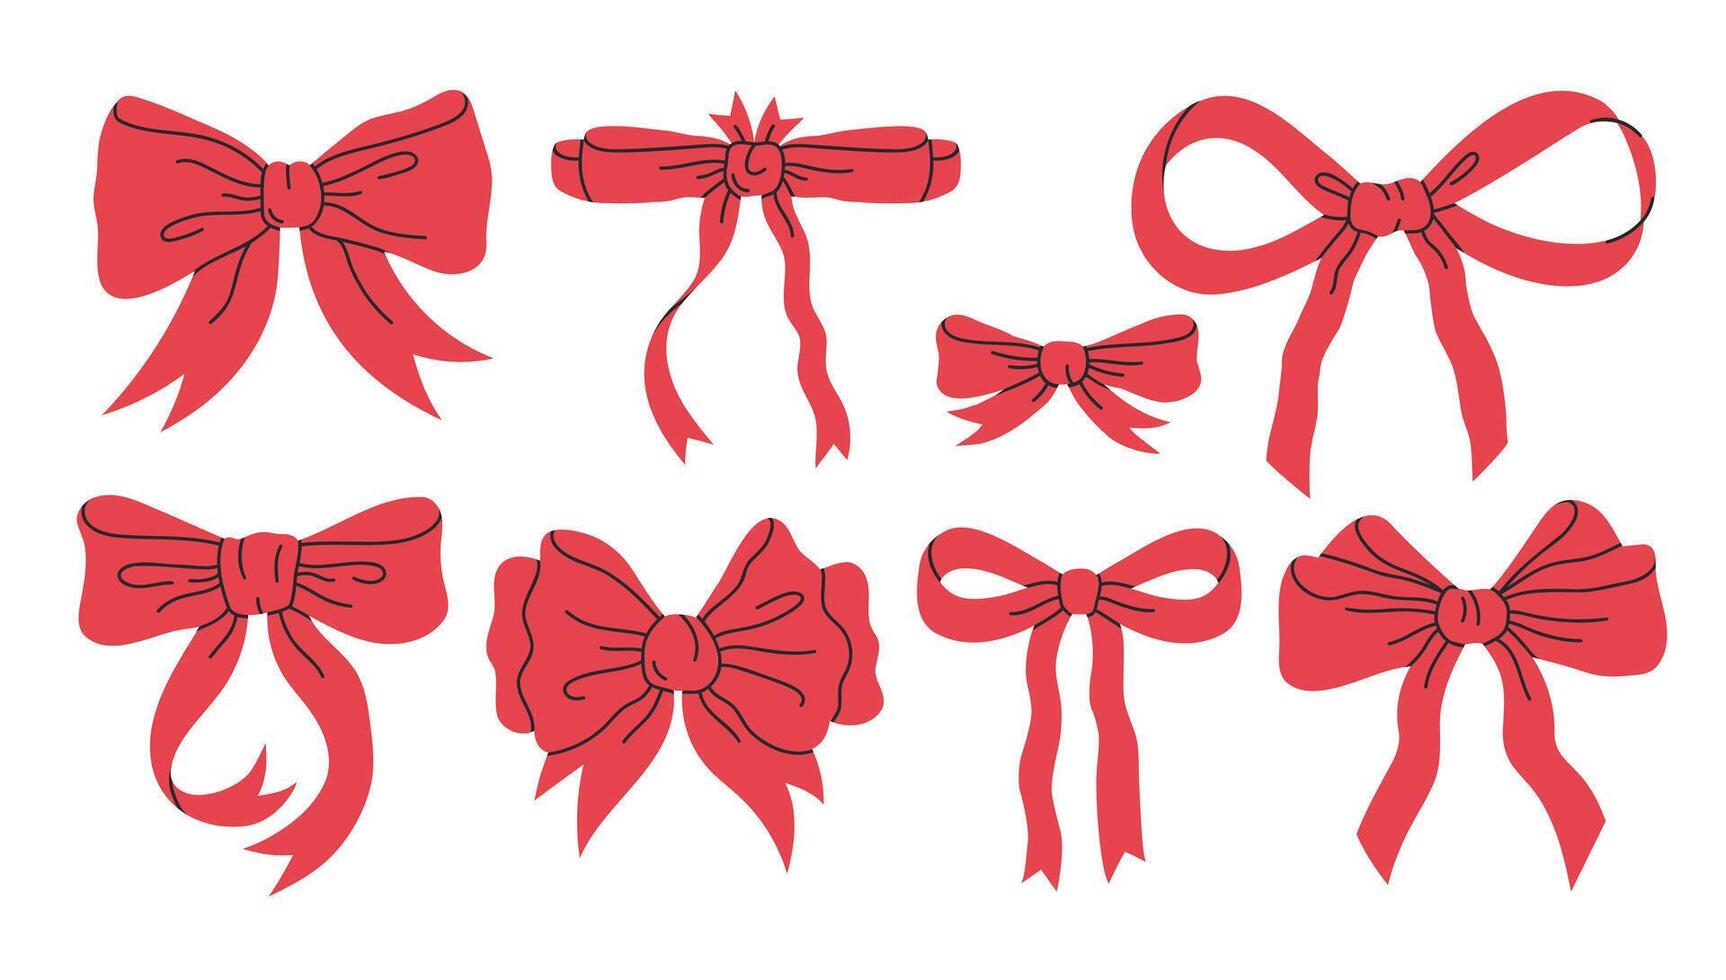 Red bows. Hand drawn silk bow for holidays present boxes, Birthday gifts red ribbon decoration flat vector illustration set. Cartoon bows collection